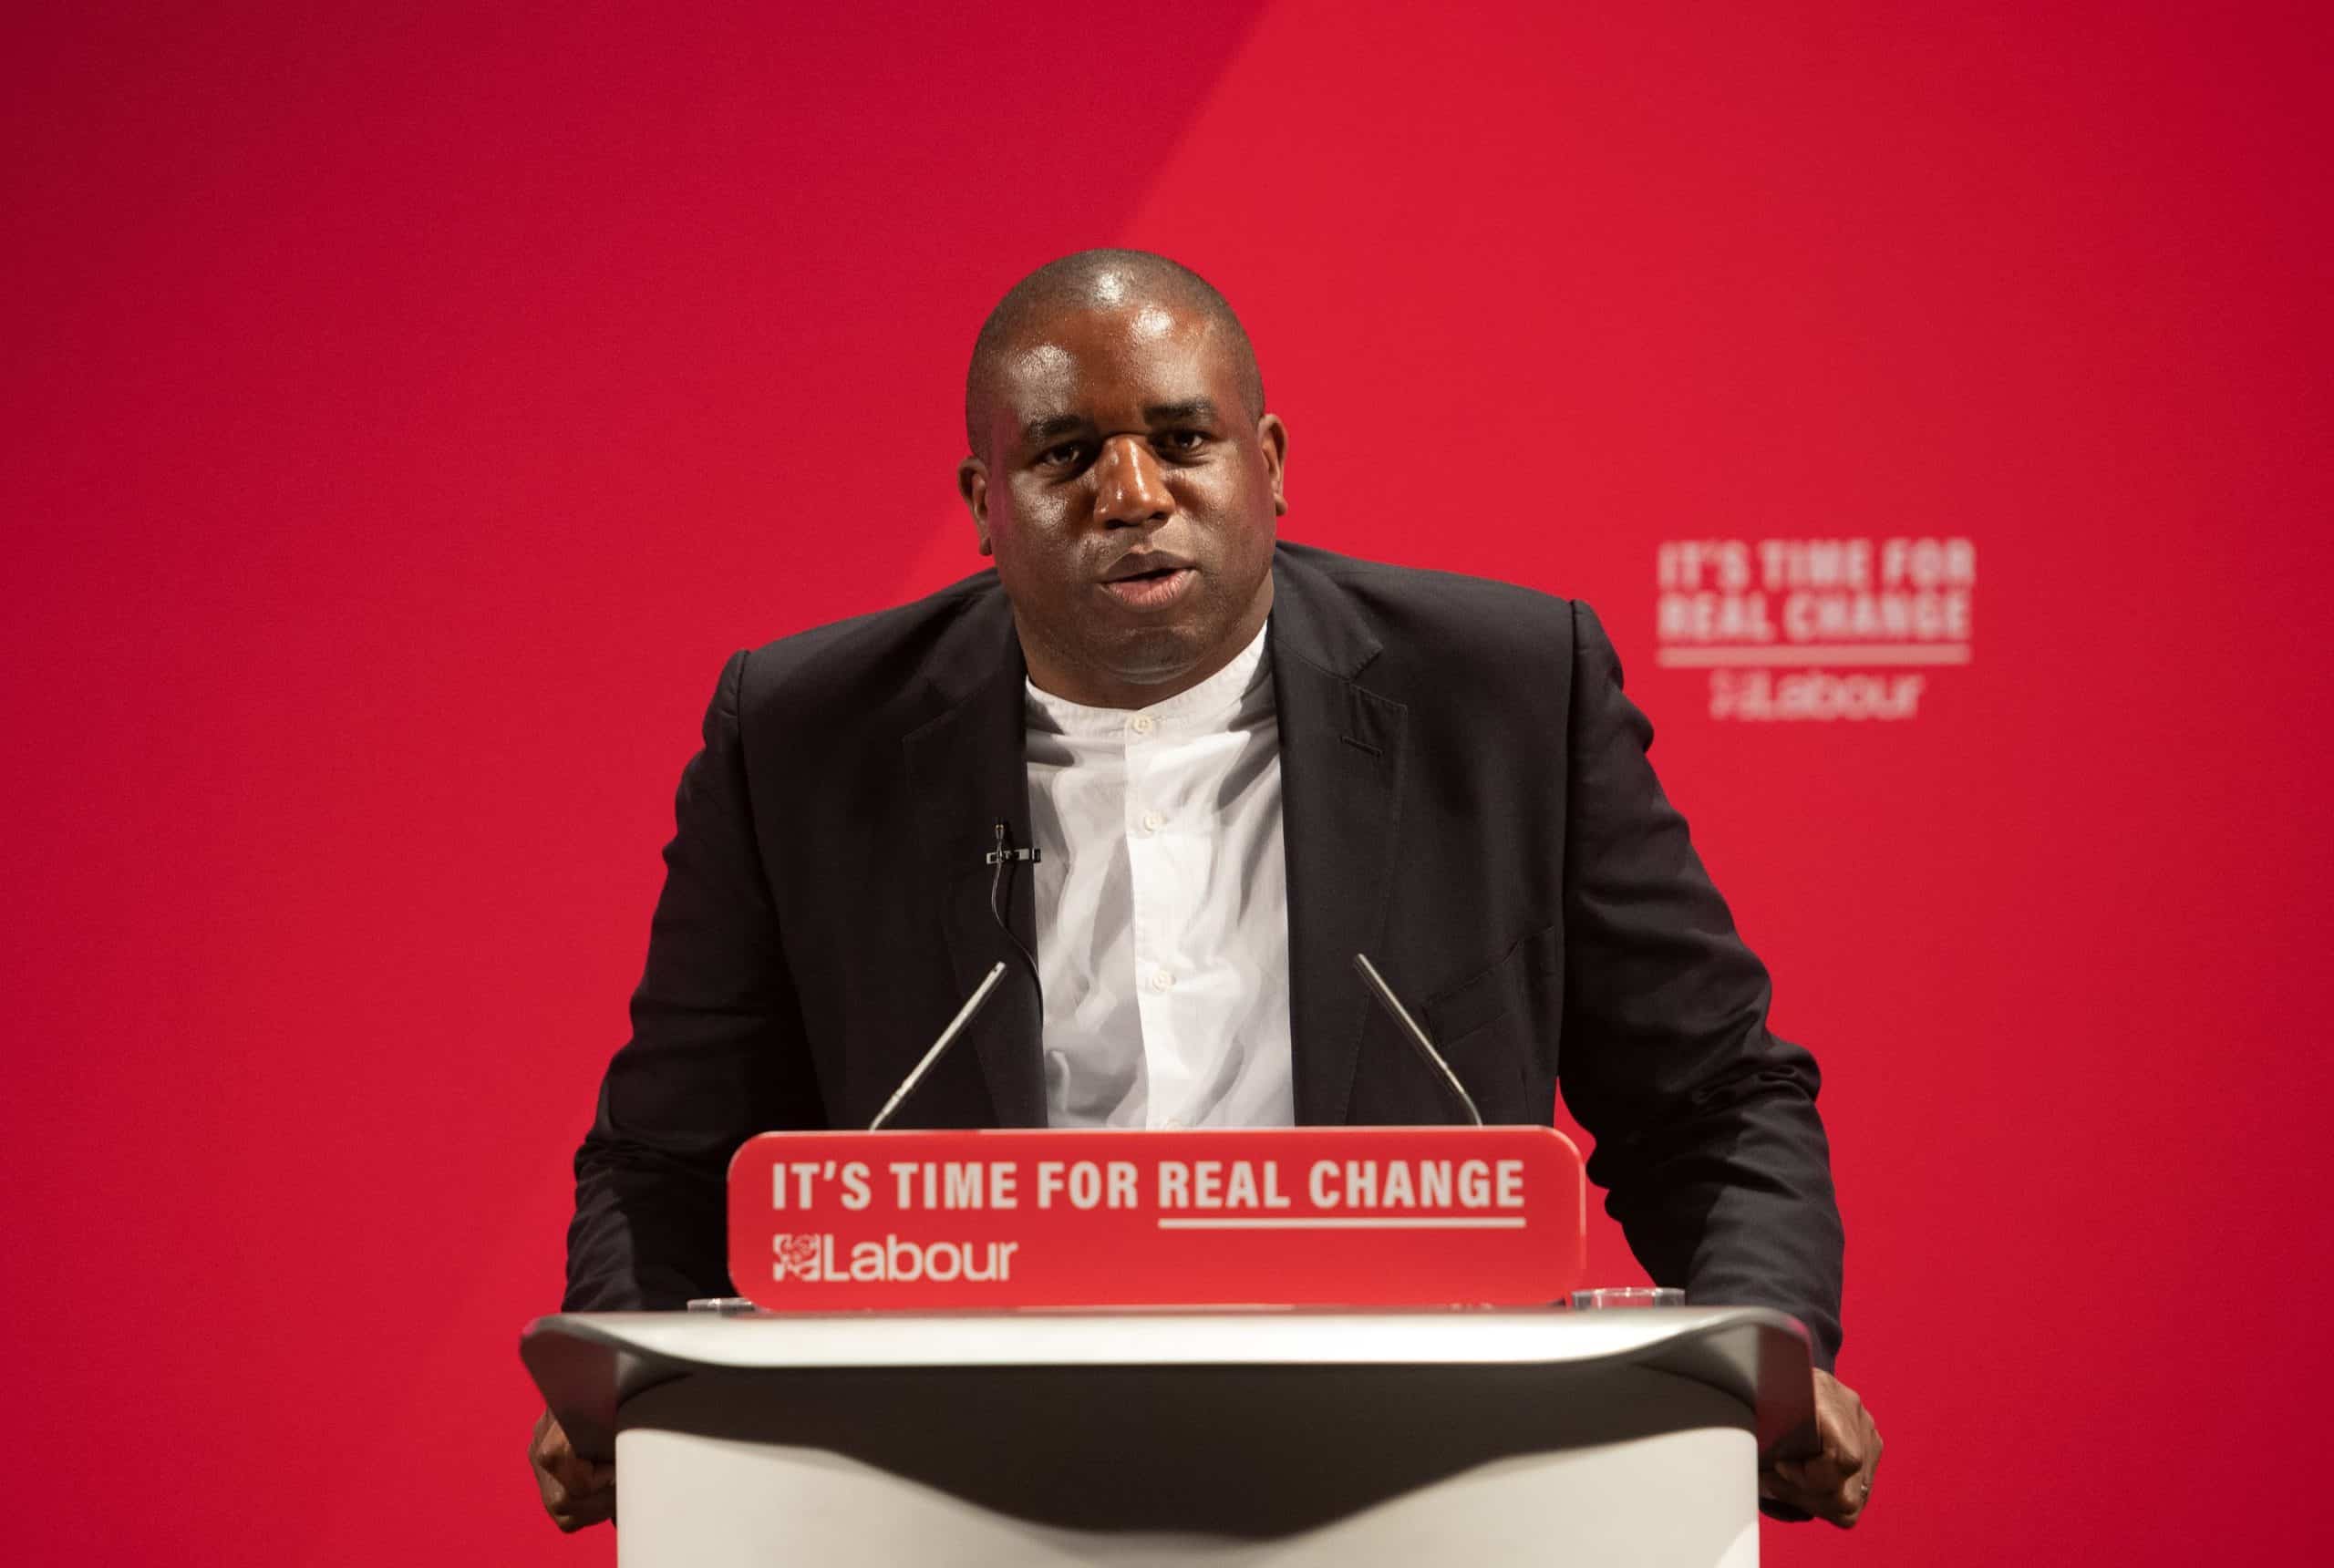 Attack southern ‘Blue Wall’ to ‘forge new coalition’, Lammy urges Starmer